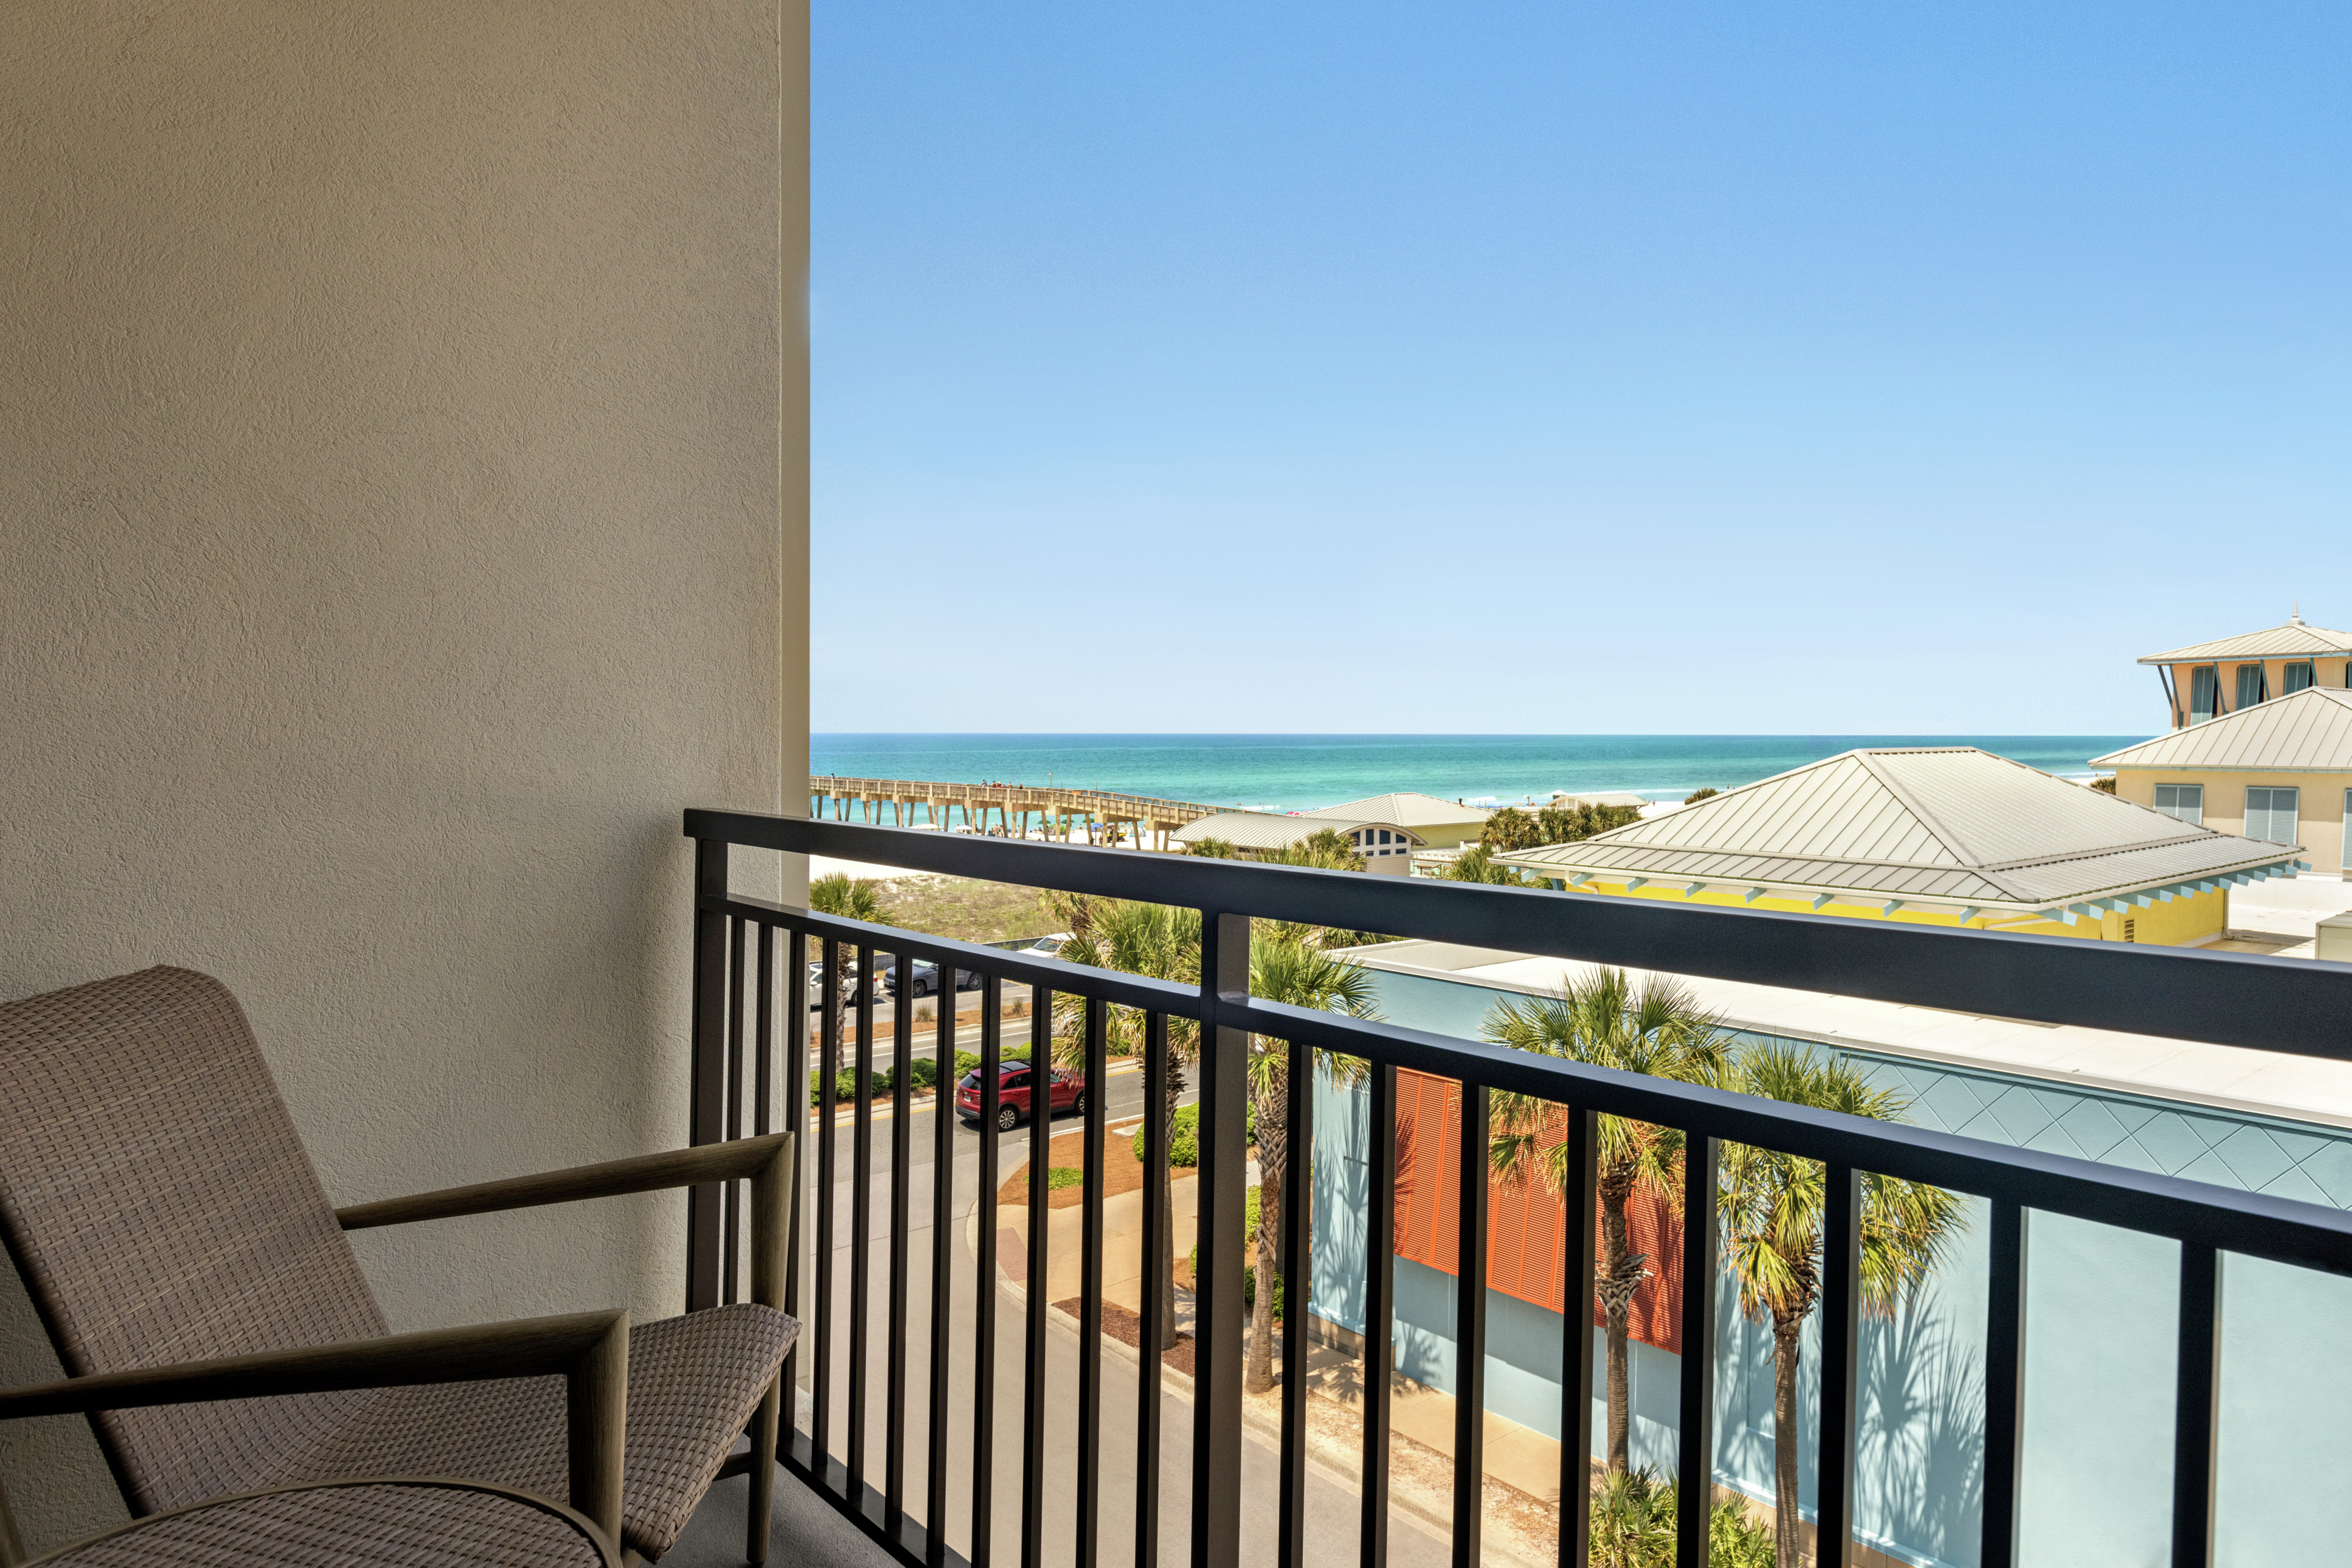 Stunning partial ocean view from guest room patio seating